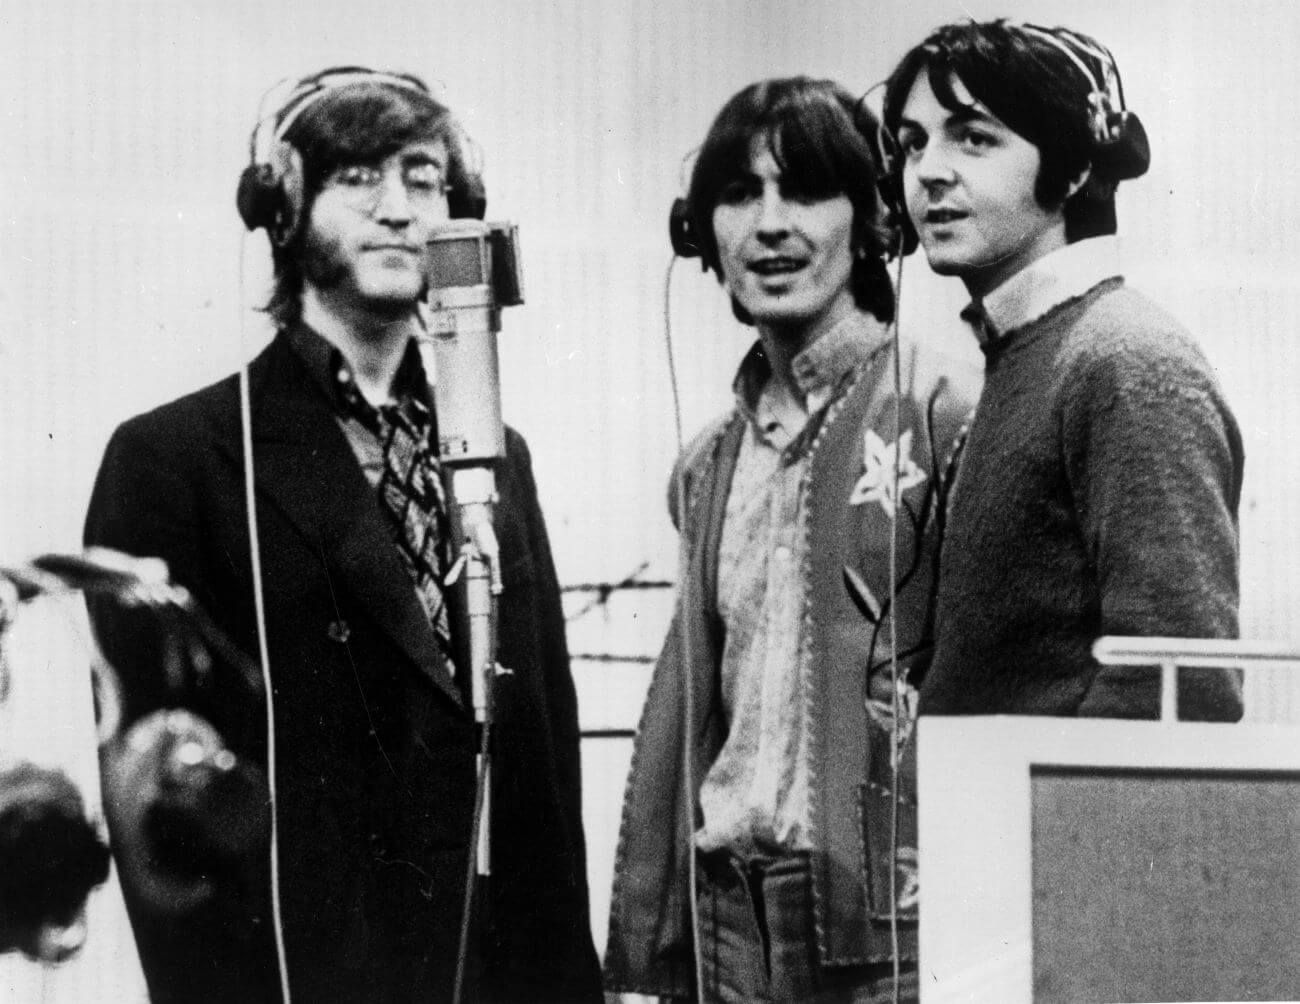 A black and white picture of John Lennon, George Harrison, and Paul McCartney wearing headphones and standing around a microphone.